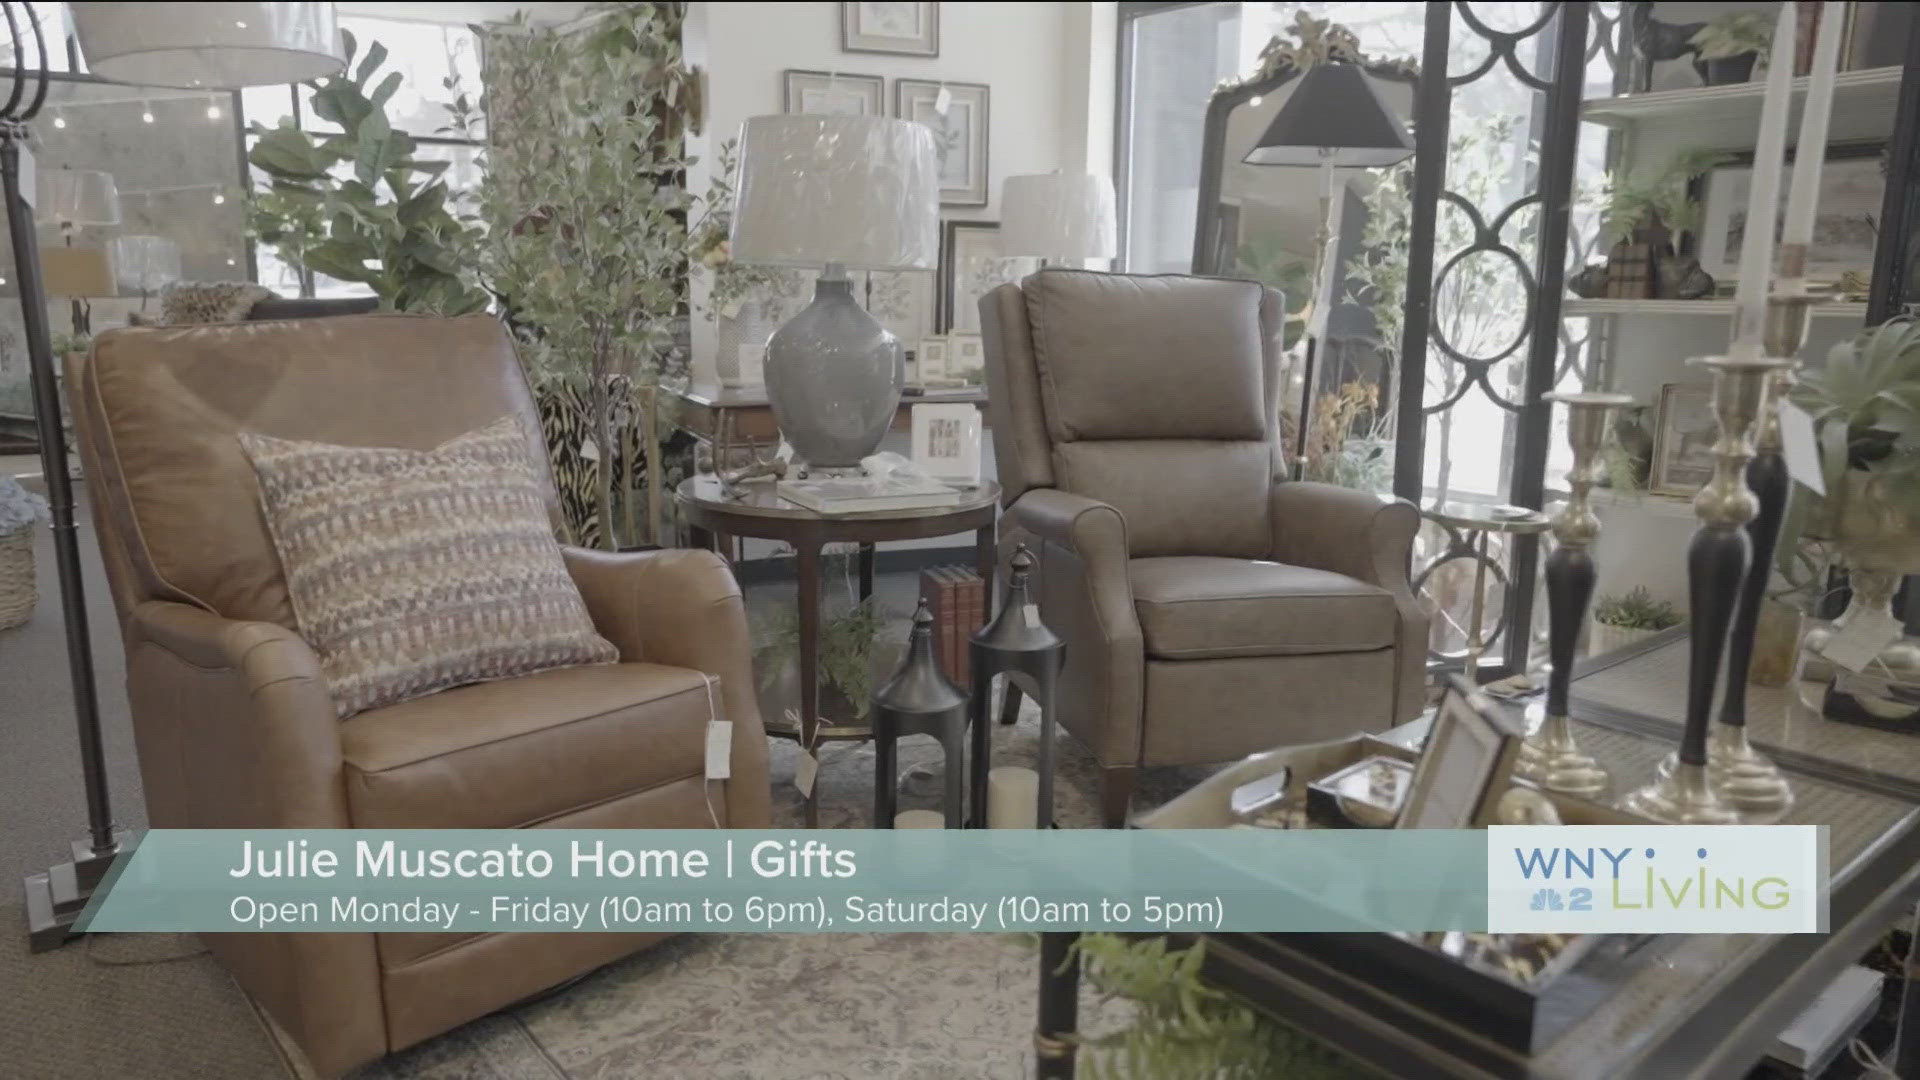 Sat 4/27 - Julie Muscato Home | Gifts (THIS VIDEO IS SPONSORED BY JULIE MUSCATO HOME | GIFTS)